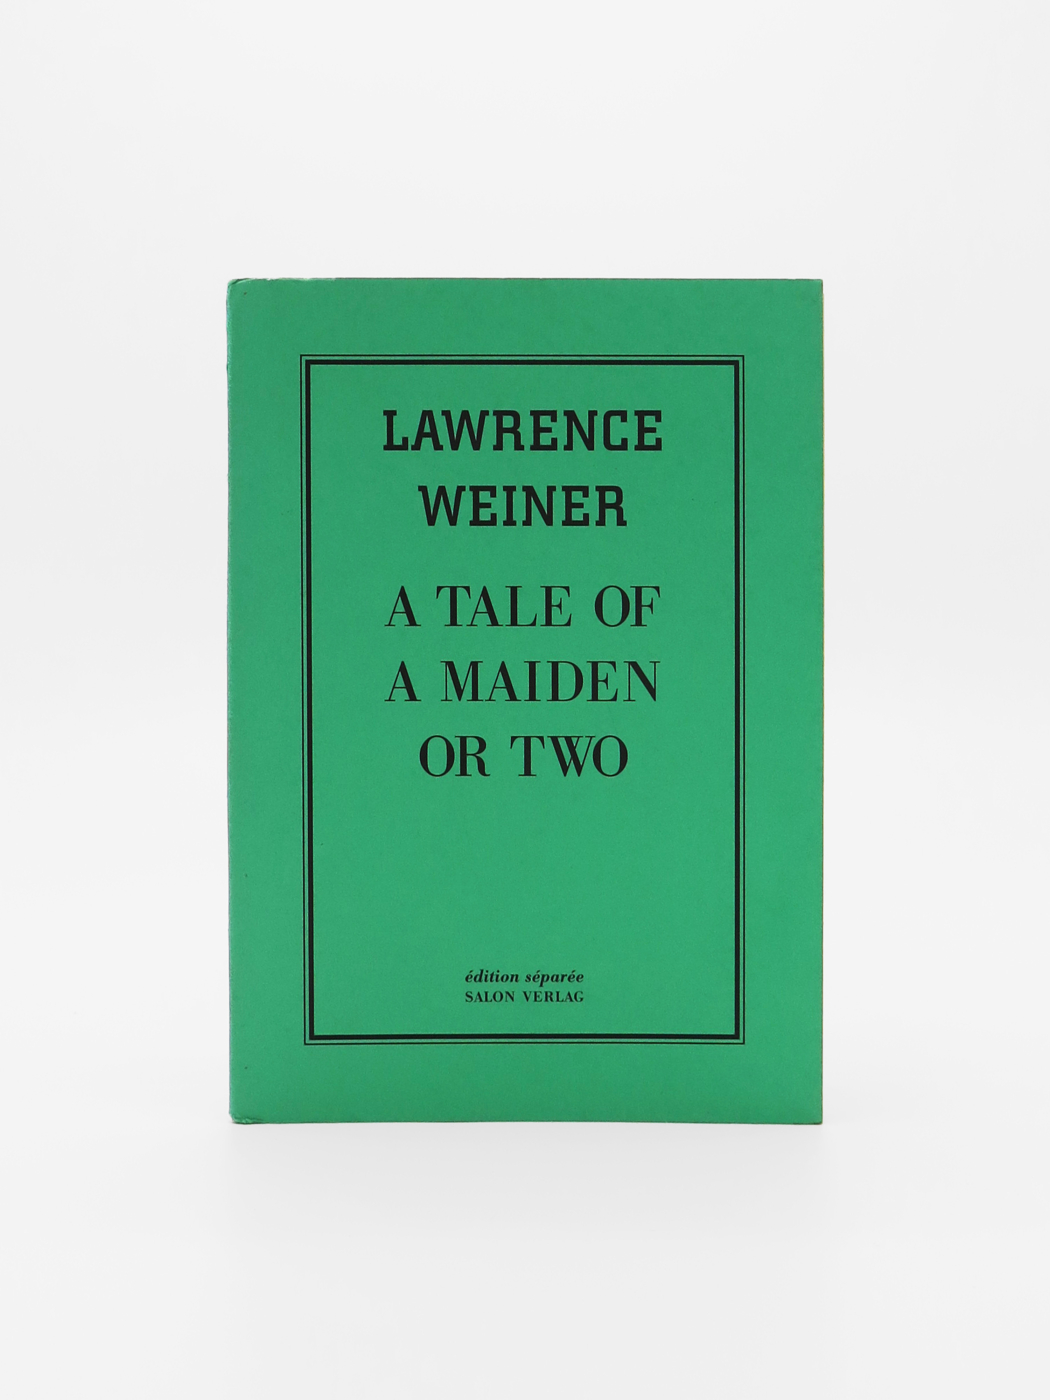 Lawrence Weiner, A Tale of A Maiden or Two